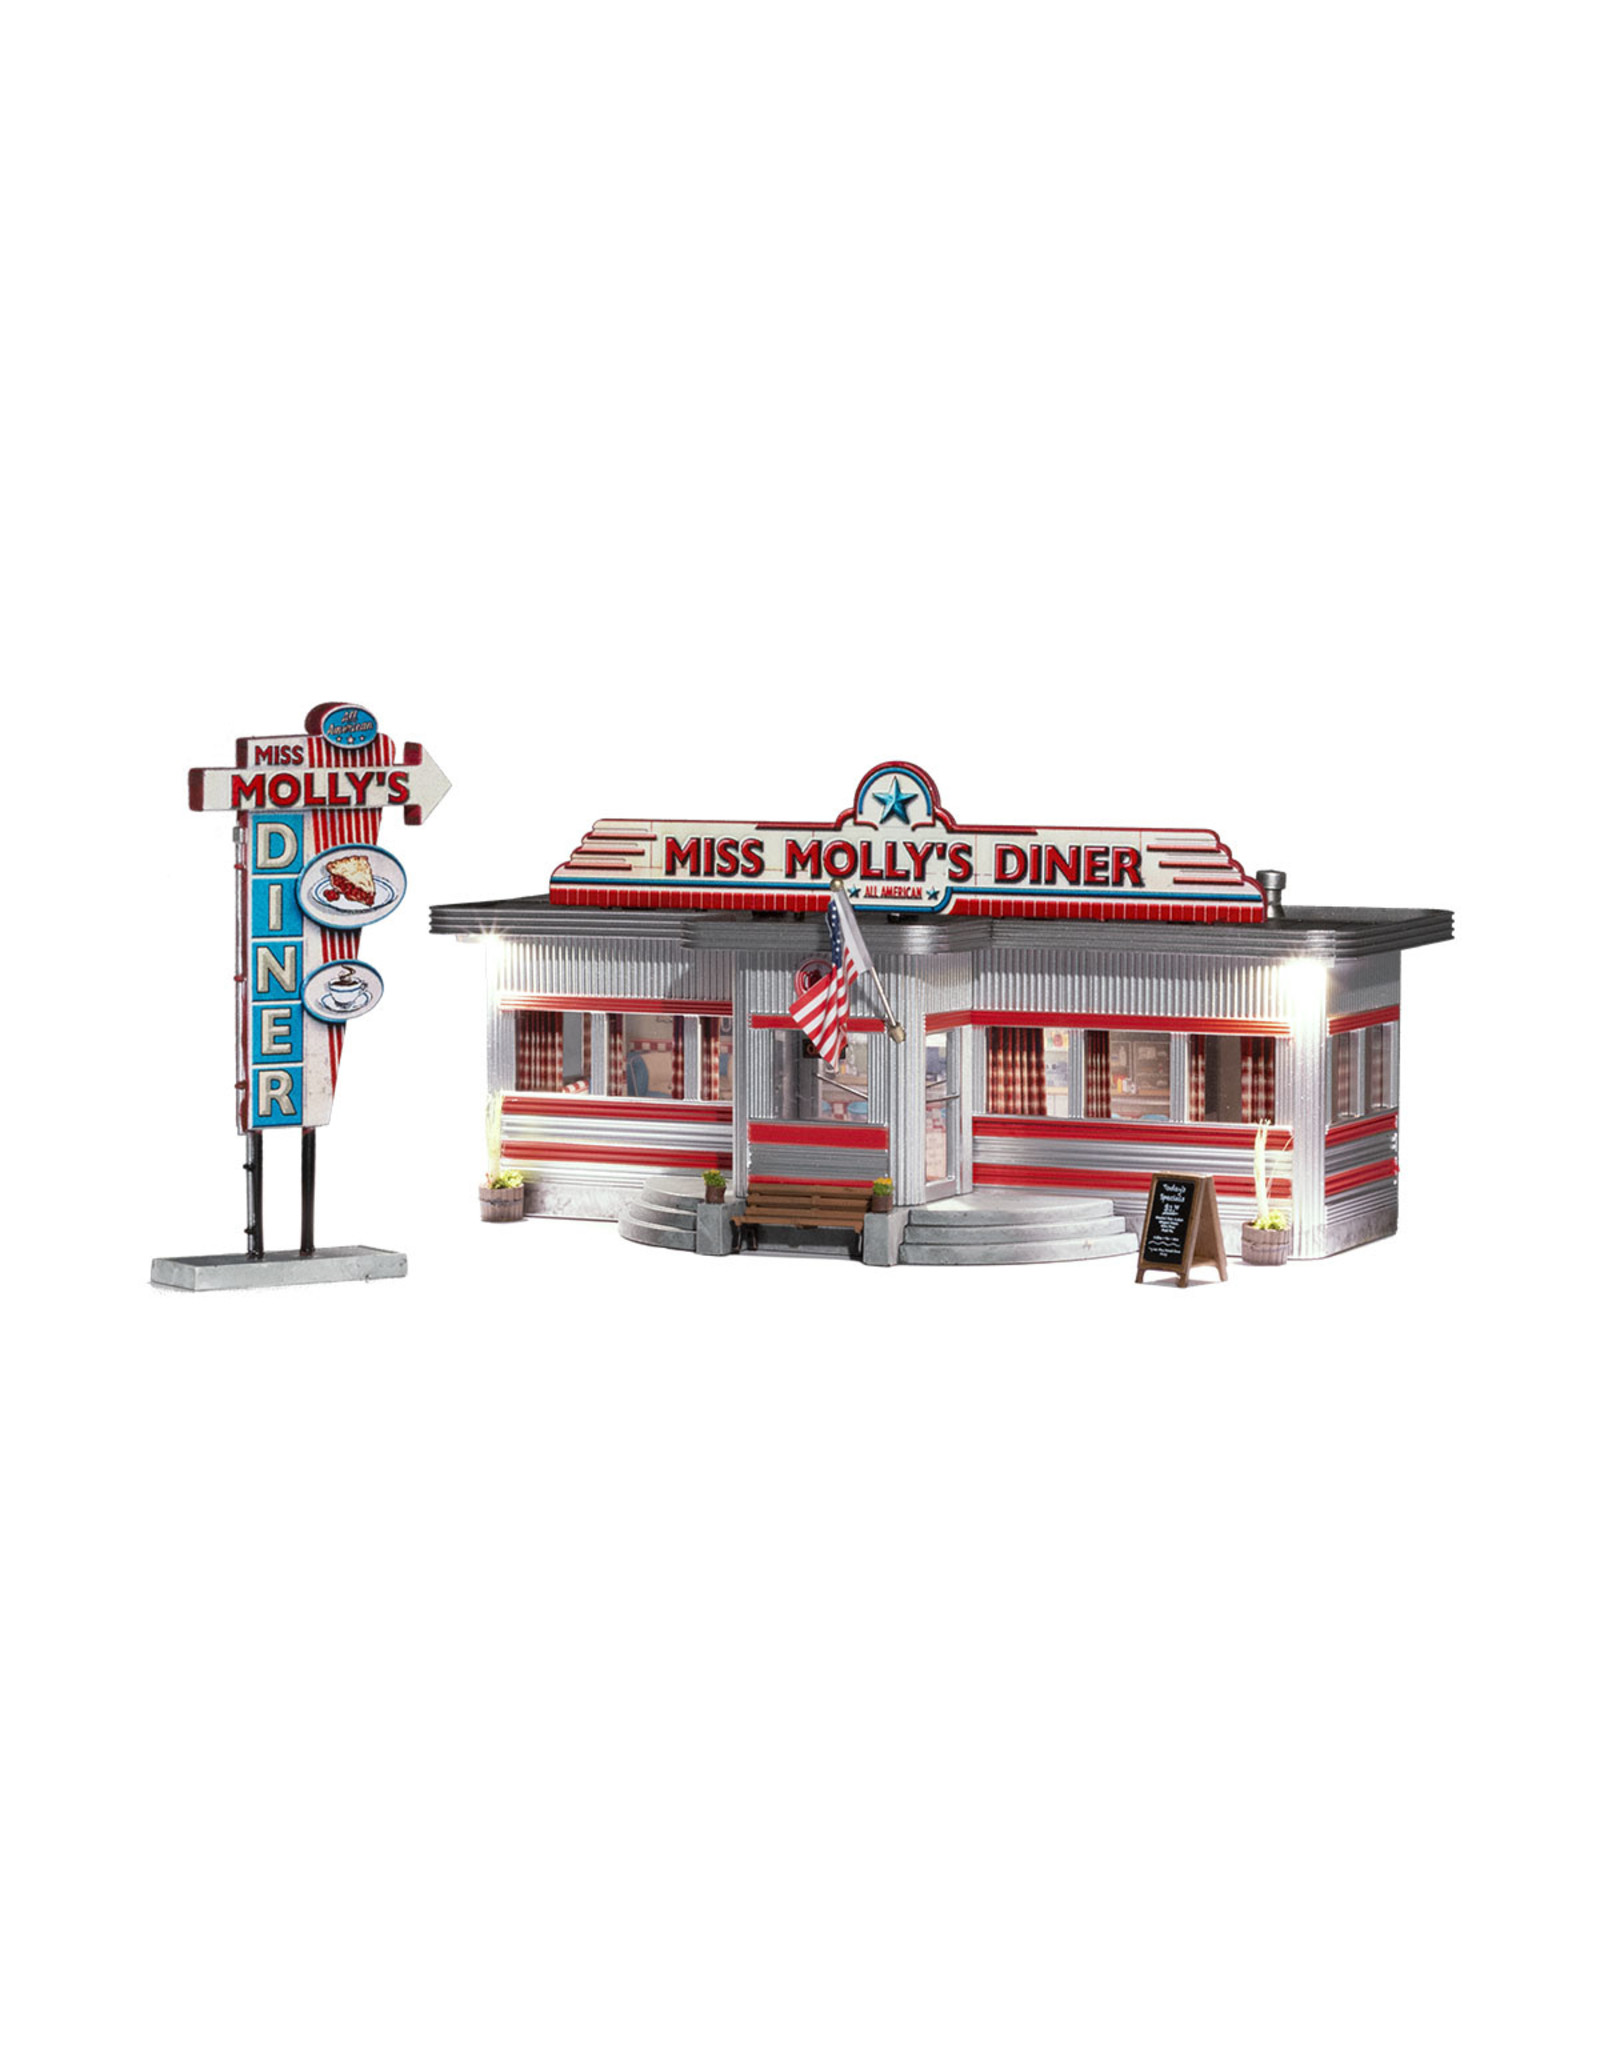 Woodland Scenics Miss Molly's Diner - N Scale